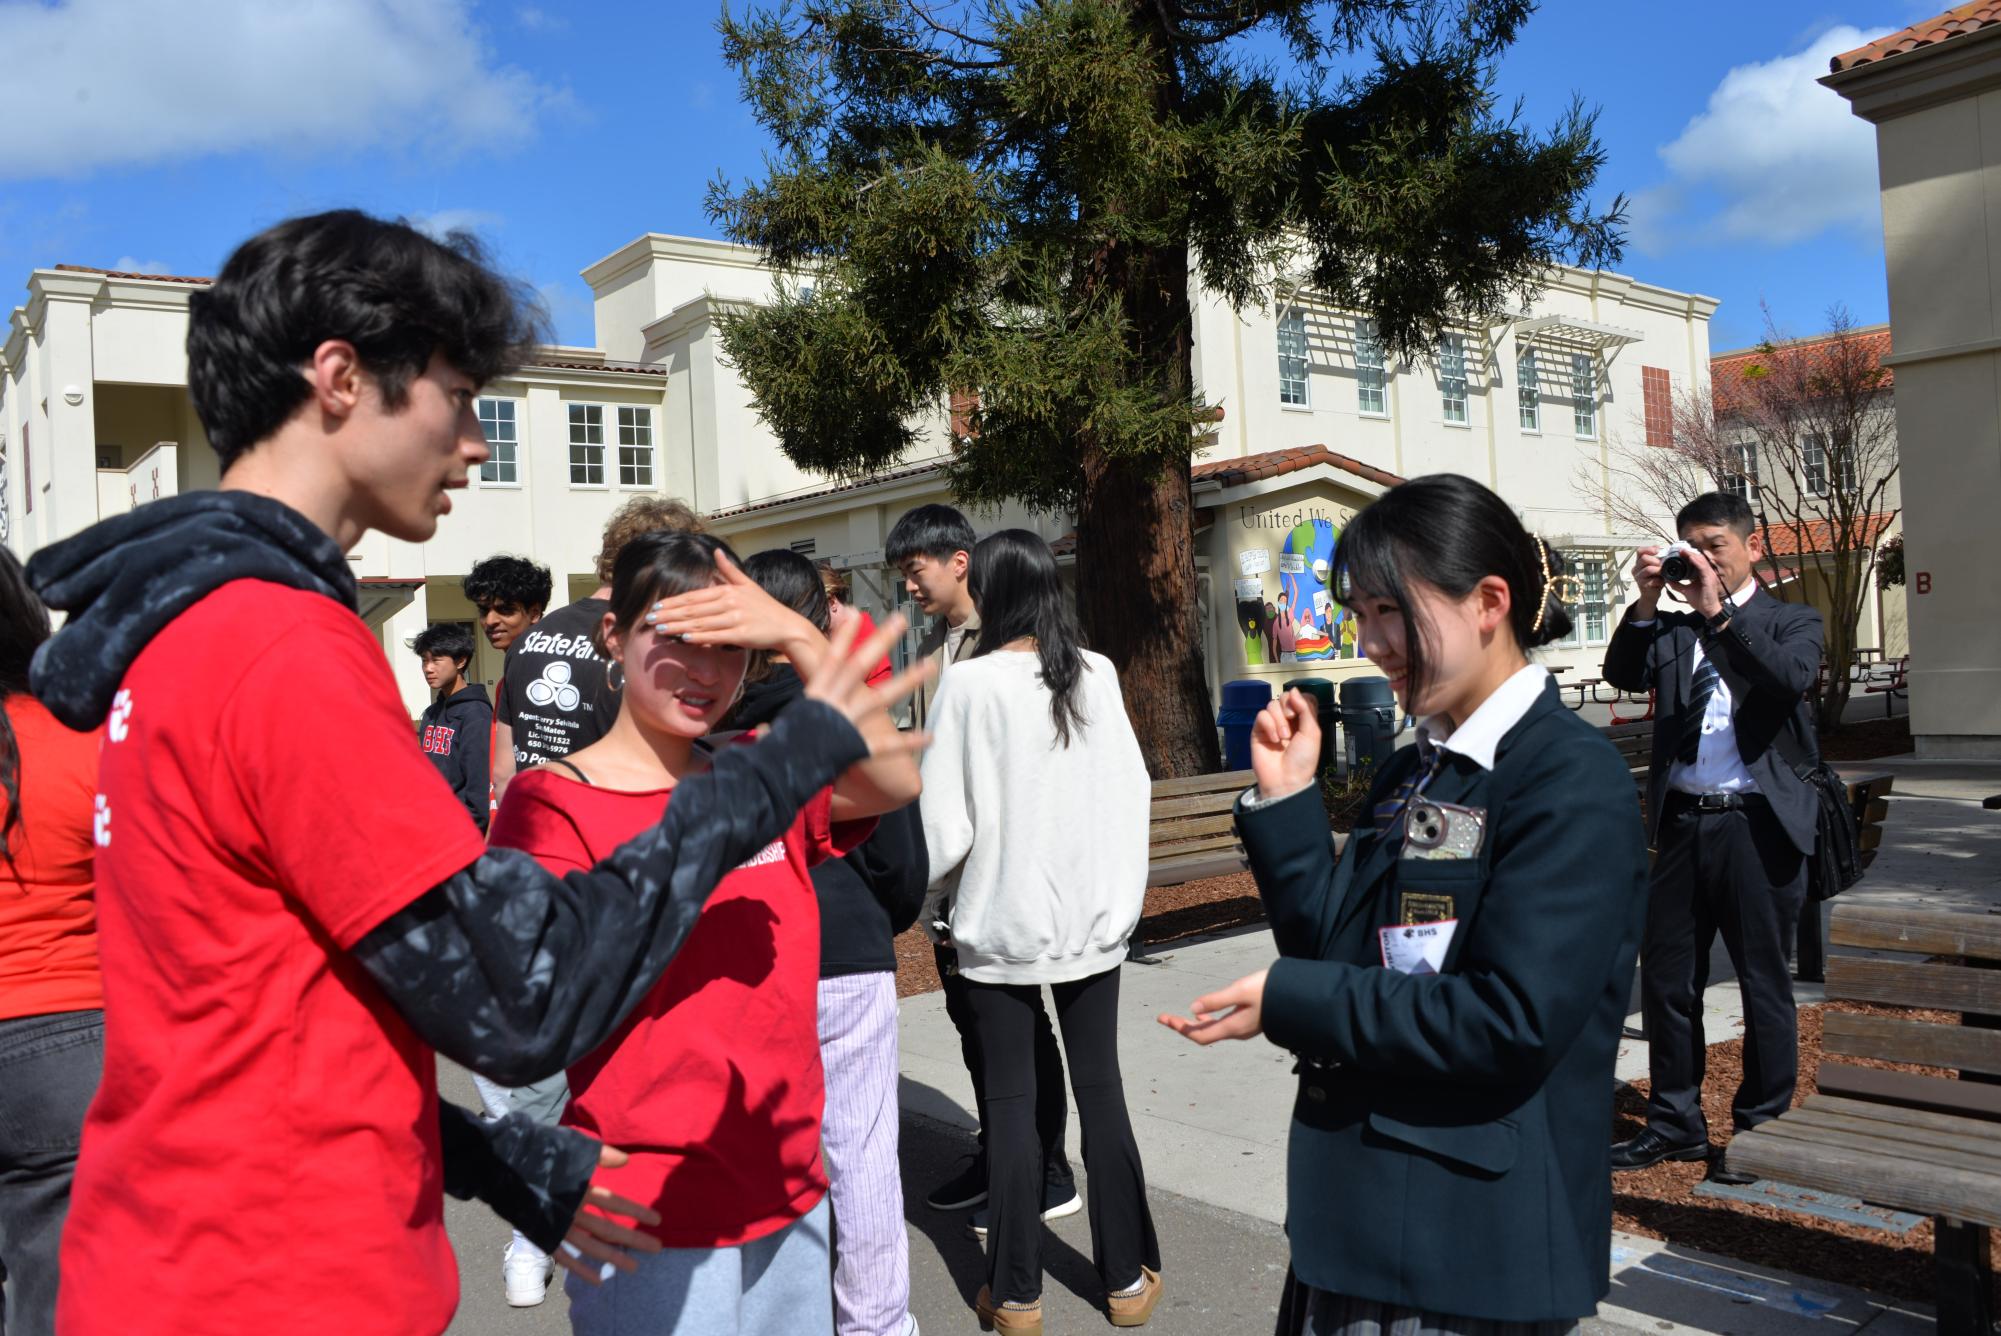 Burlingame+welcomes+five+exchange+students+from+Japan